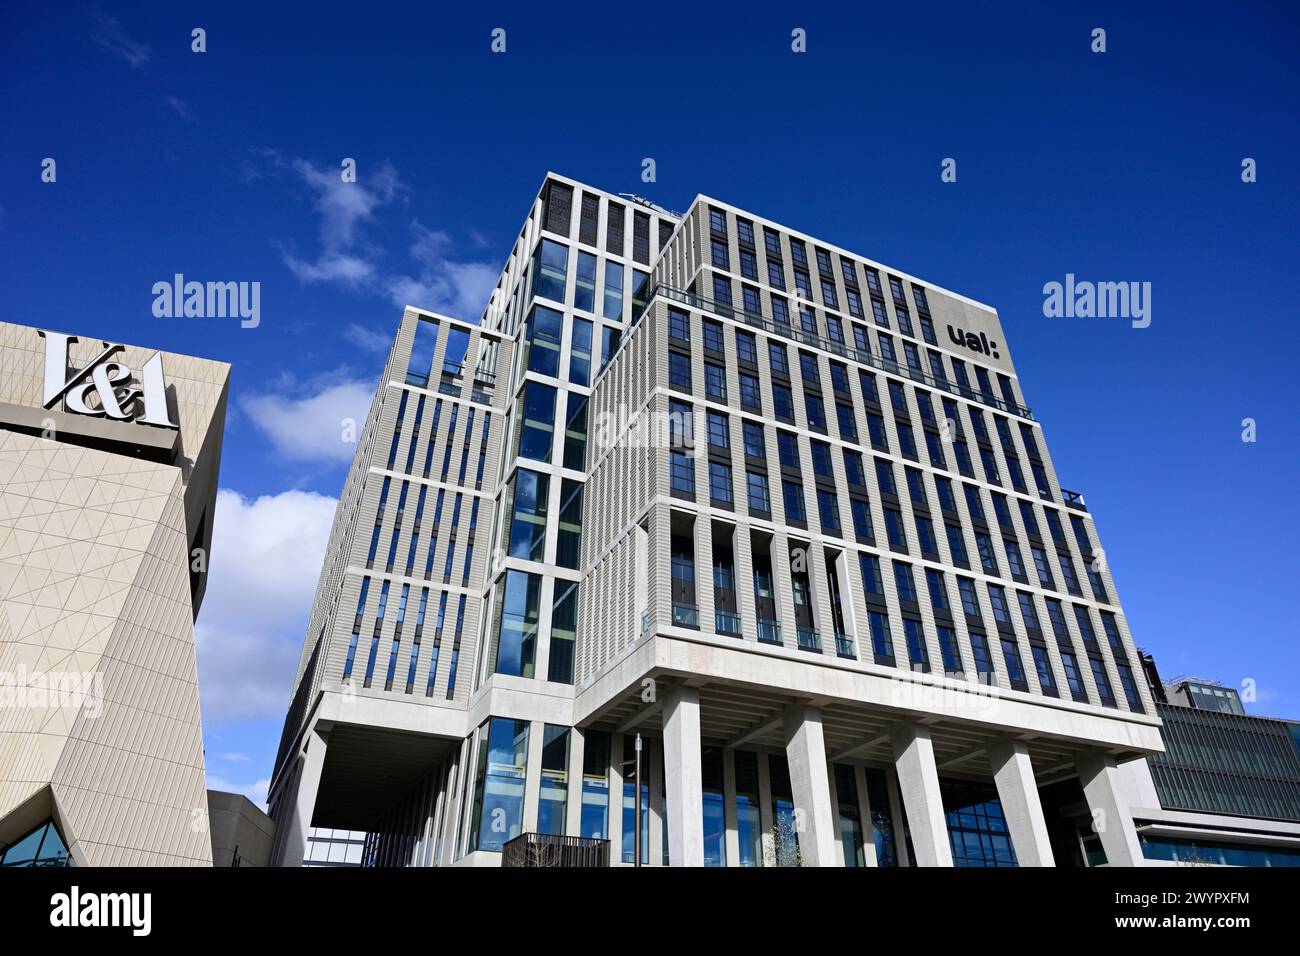 London College of Fashion, UAL, Carpenters Road, Queen Elizabeth Olympic Park East Bank, Stratford, East London, United Kingdom Stock Photo